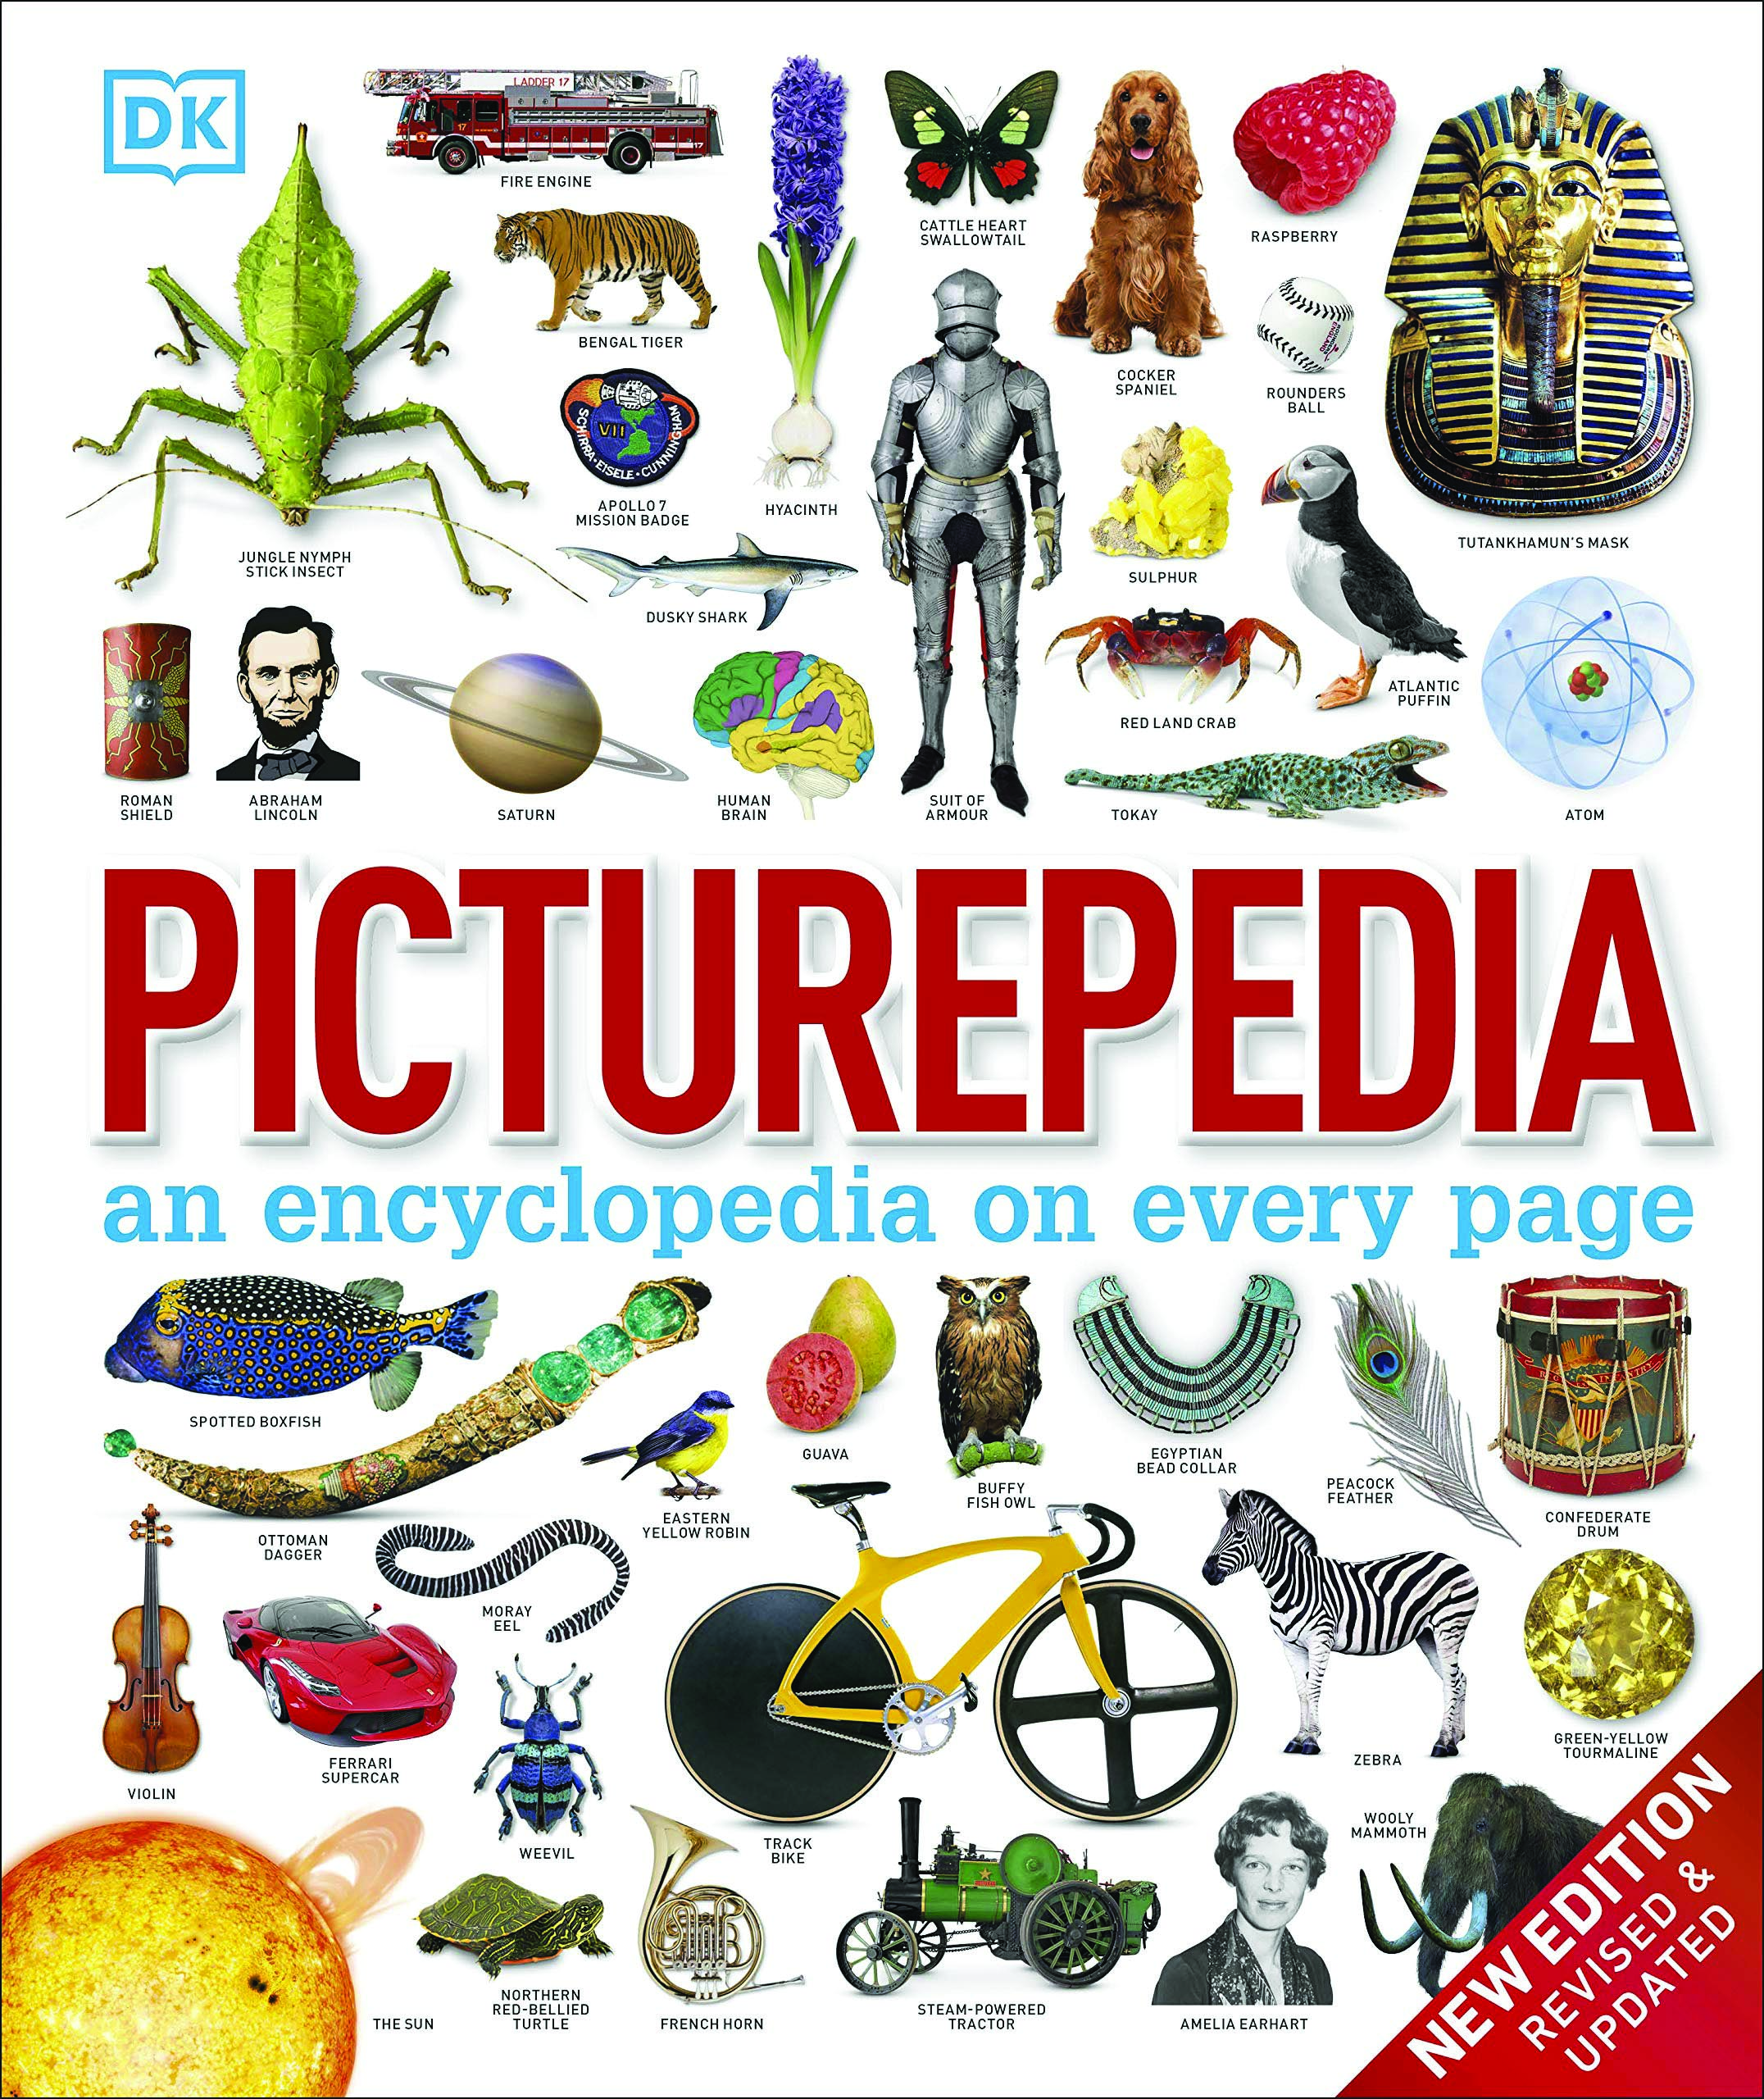 Picturepedia —an encyclopedia on every page